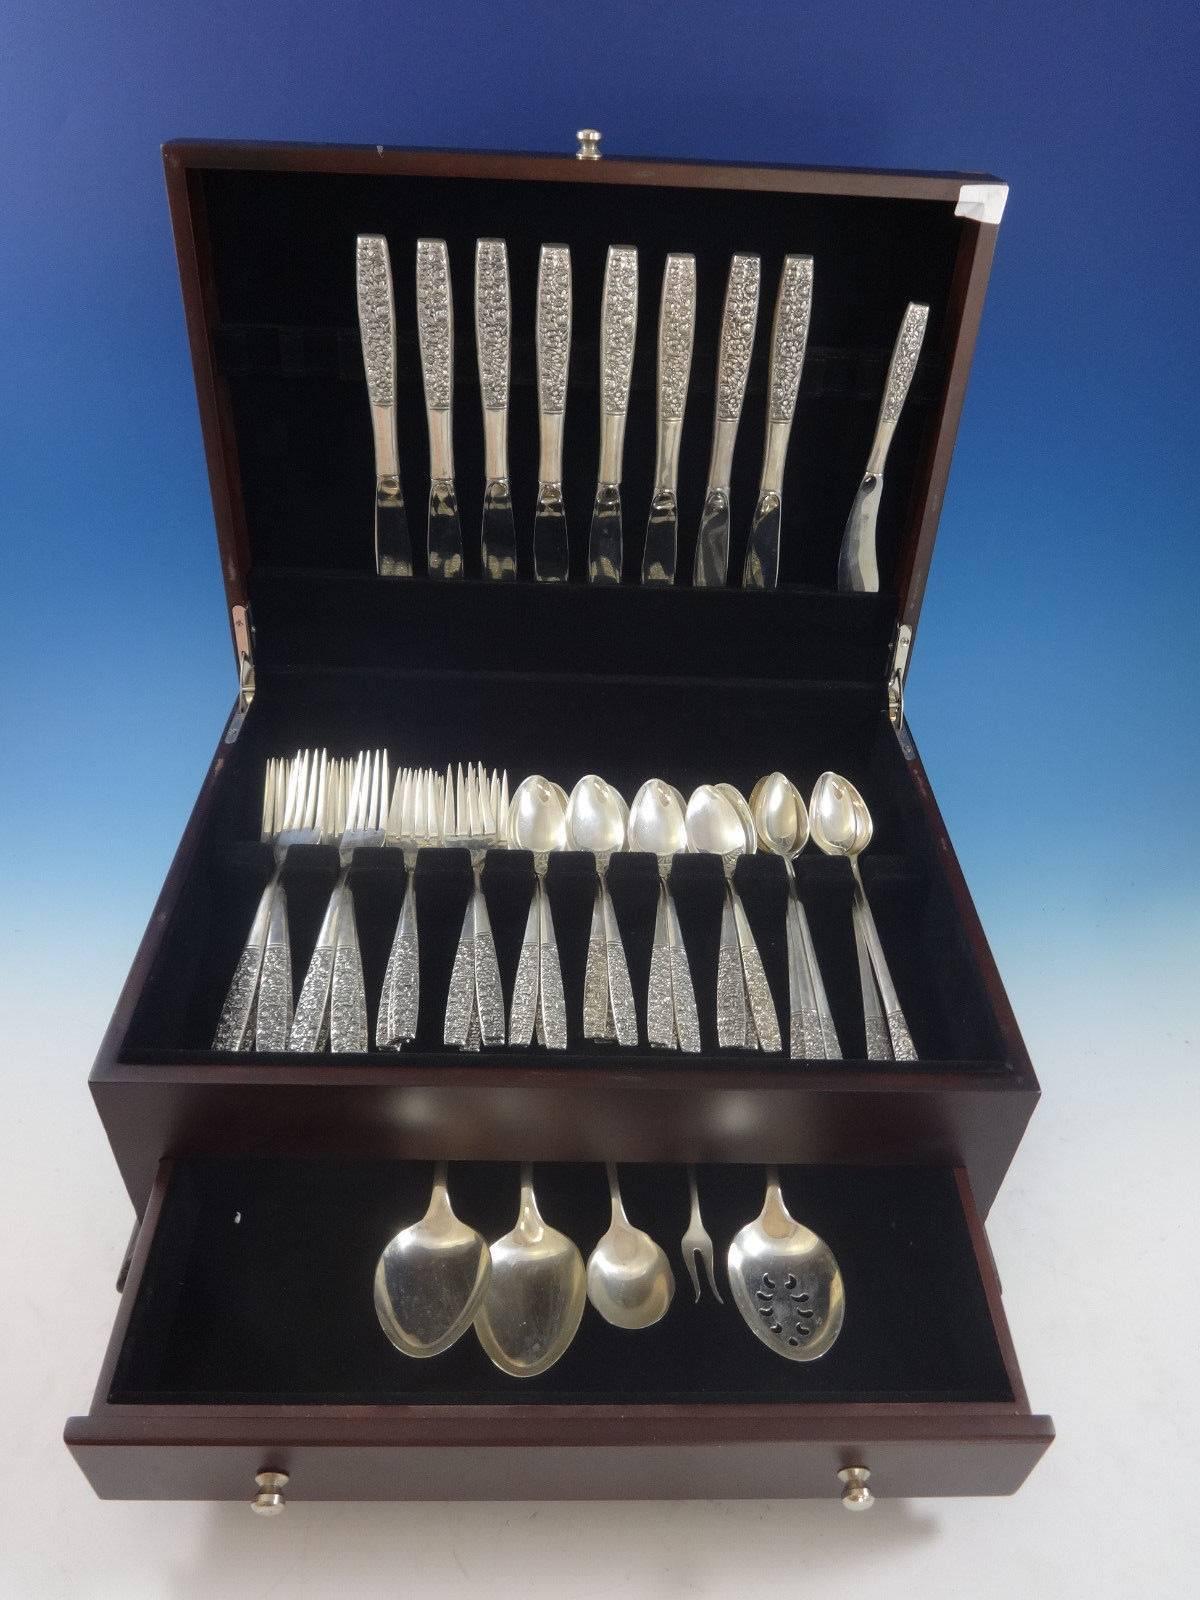 Contessina by Towle sterling silver flatware set - 54 Pieces. This set includes: 

Eight knives, 9